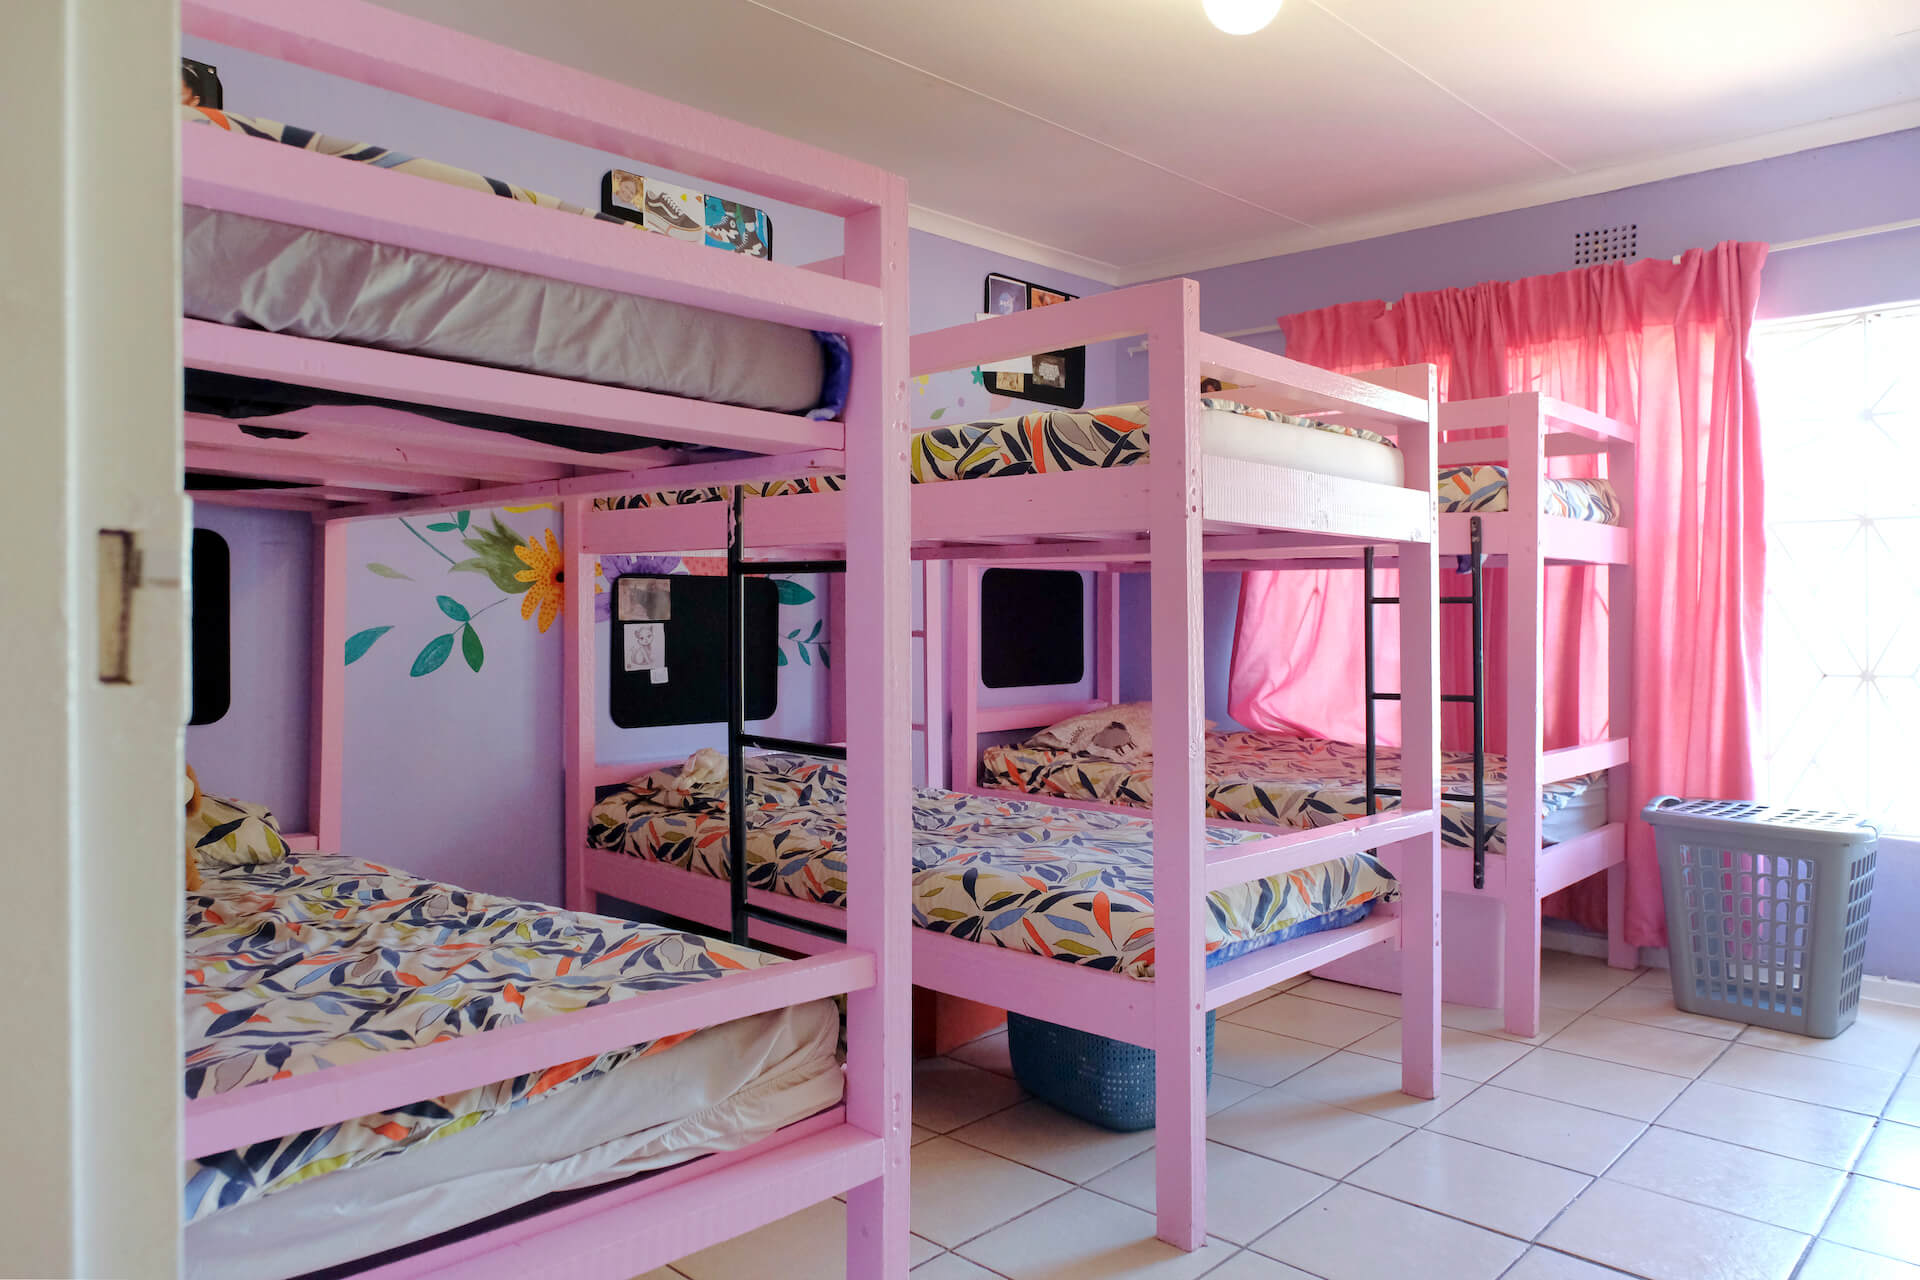 llamula house was built in 2014 by the winnie mabaso foundation, this is a bedroom for the orphaned girls